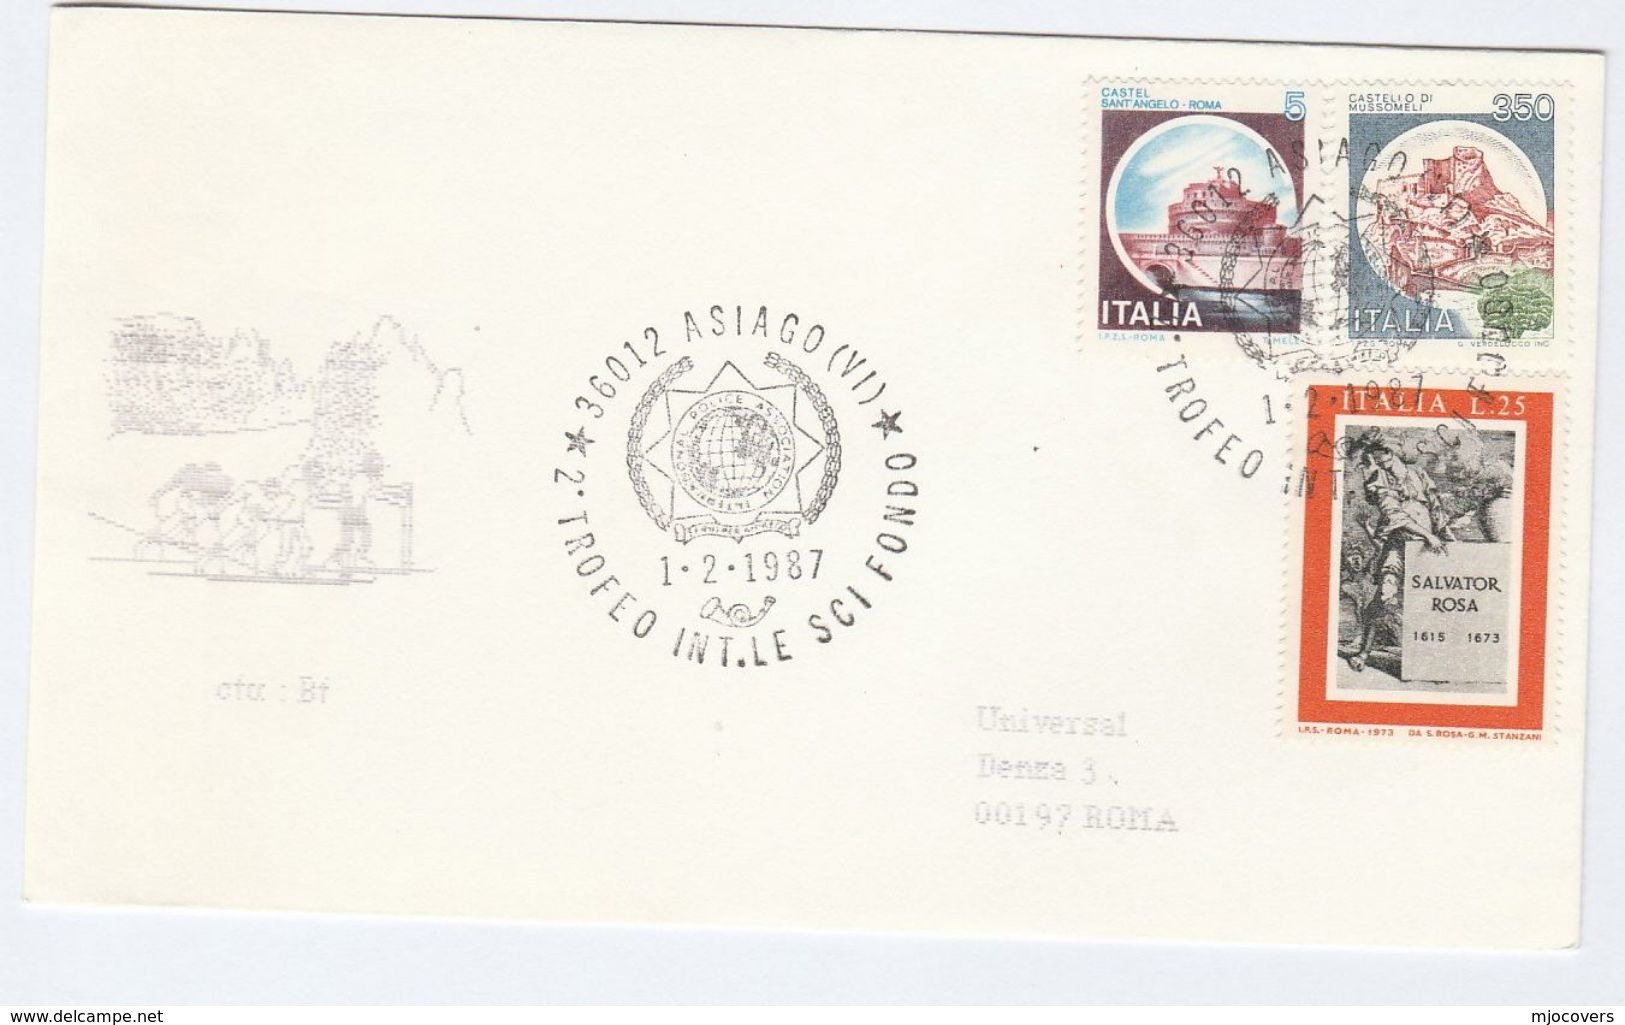 1987 International POLICE ASSOCIATION Cross Country SKIING EVENT COVER Asiago Italy Stamps Ski Sport - Police - Gendarmerie